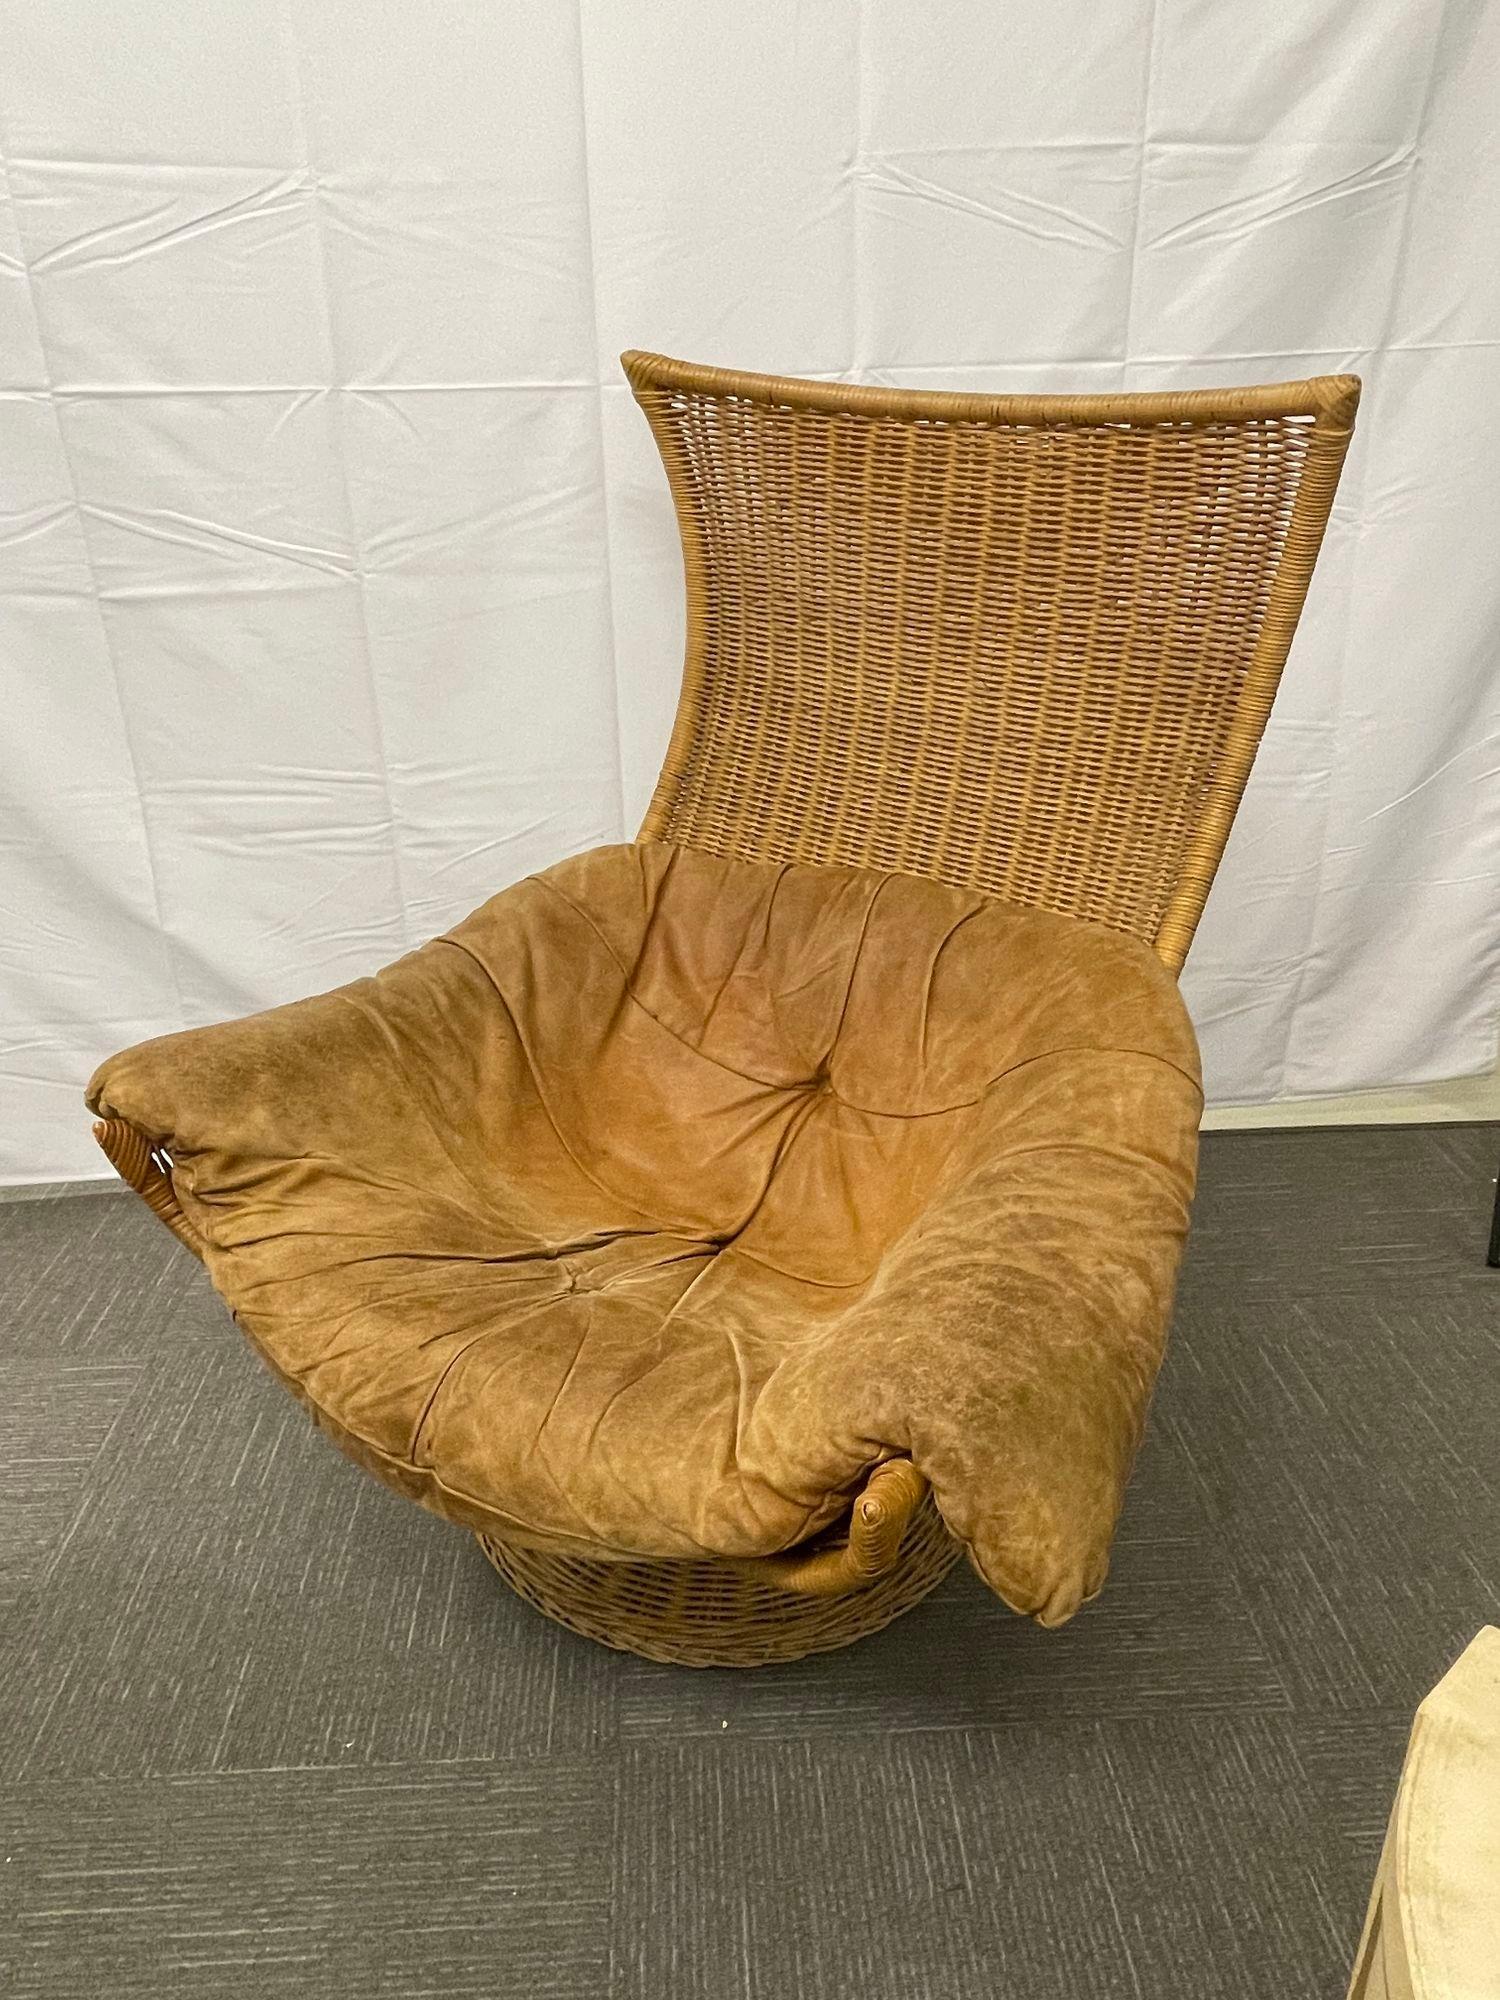 A rush seat and back wicker lounge / swivel chair, Throne Chair
 
A rush seat and back throne wicker lounge swivel chair. Having a fine custom quality with a one light brown colored worn leather throw pillow cushion. 
 
1970s Monumental swivel